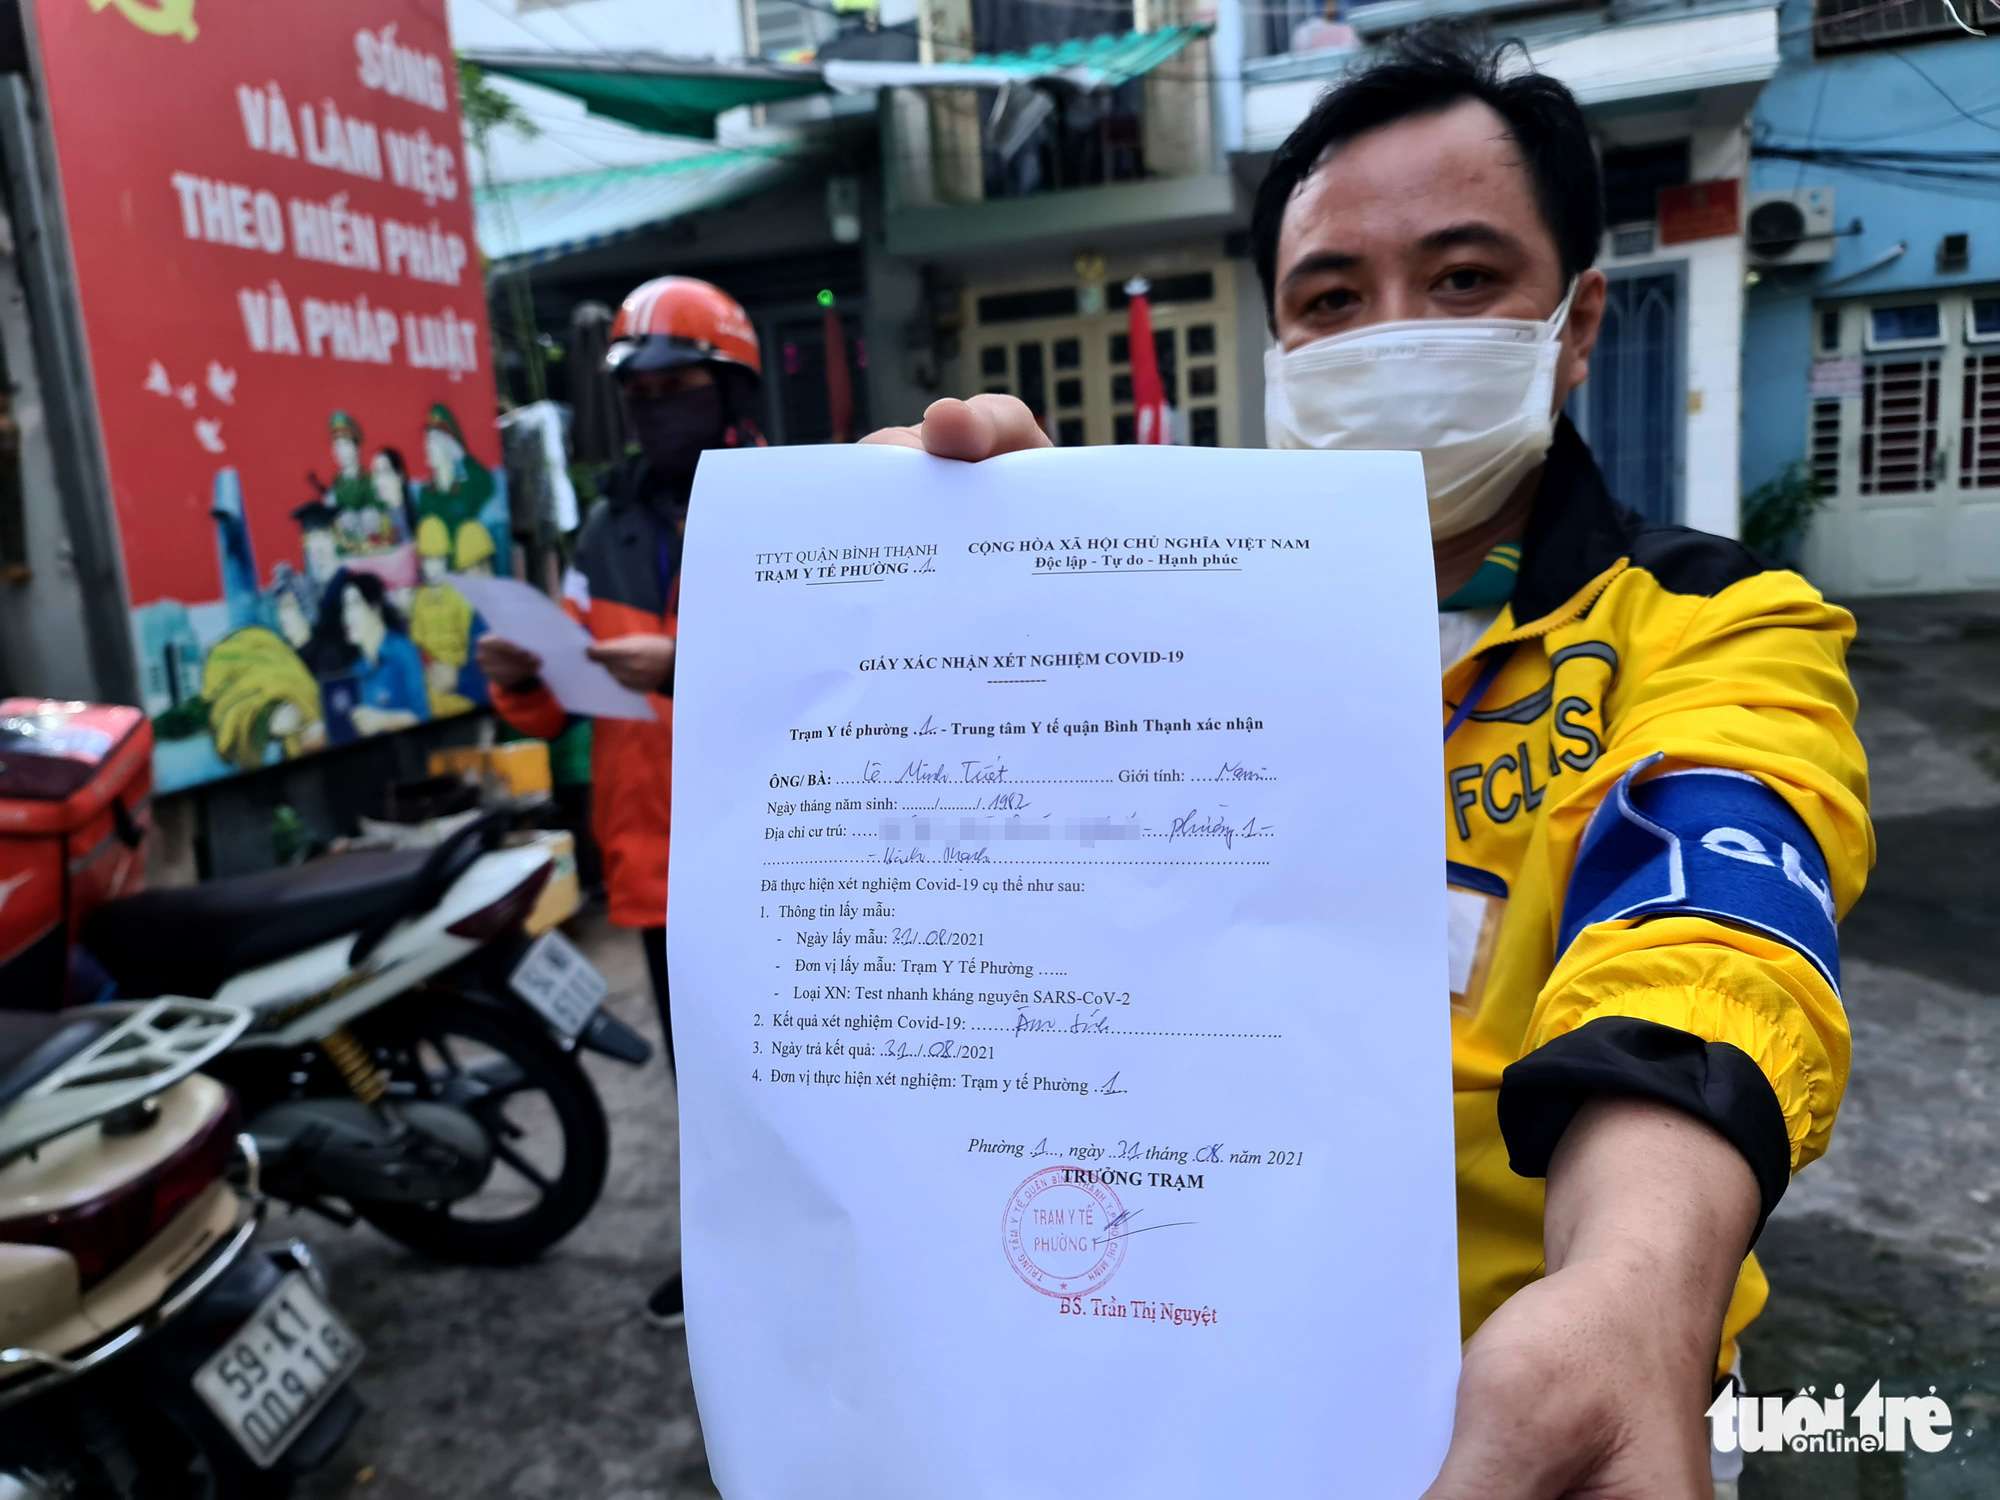 A delivery worker shows his negative test result in Binh Thanh District, Ho Chi Minh City, August 31, 2021. Photo: Ngoc Hien / Tuoi Tre